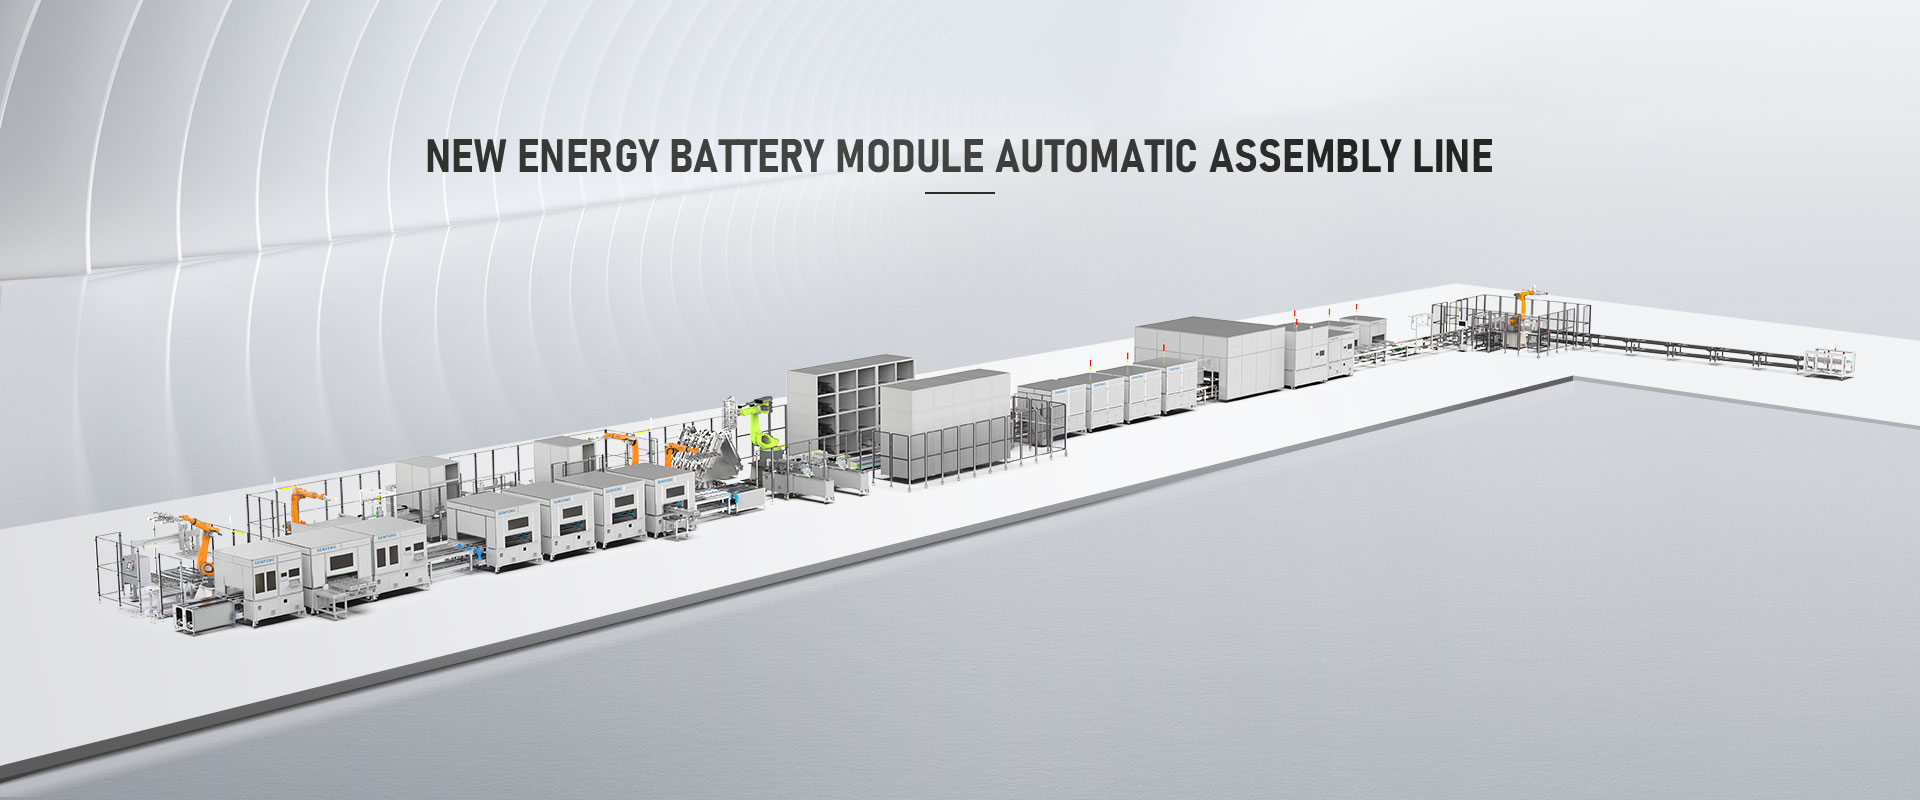 New Energy Battery Module Automatic Assembly Line